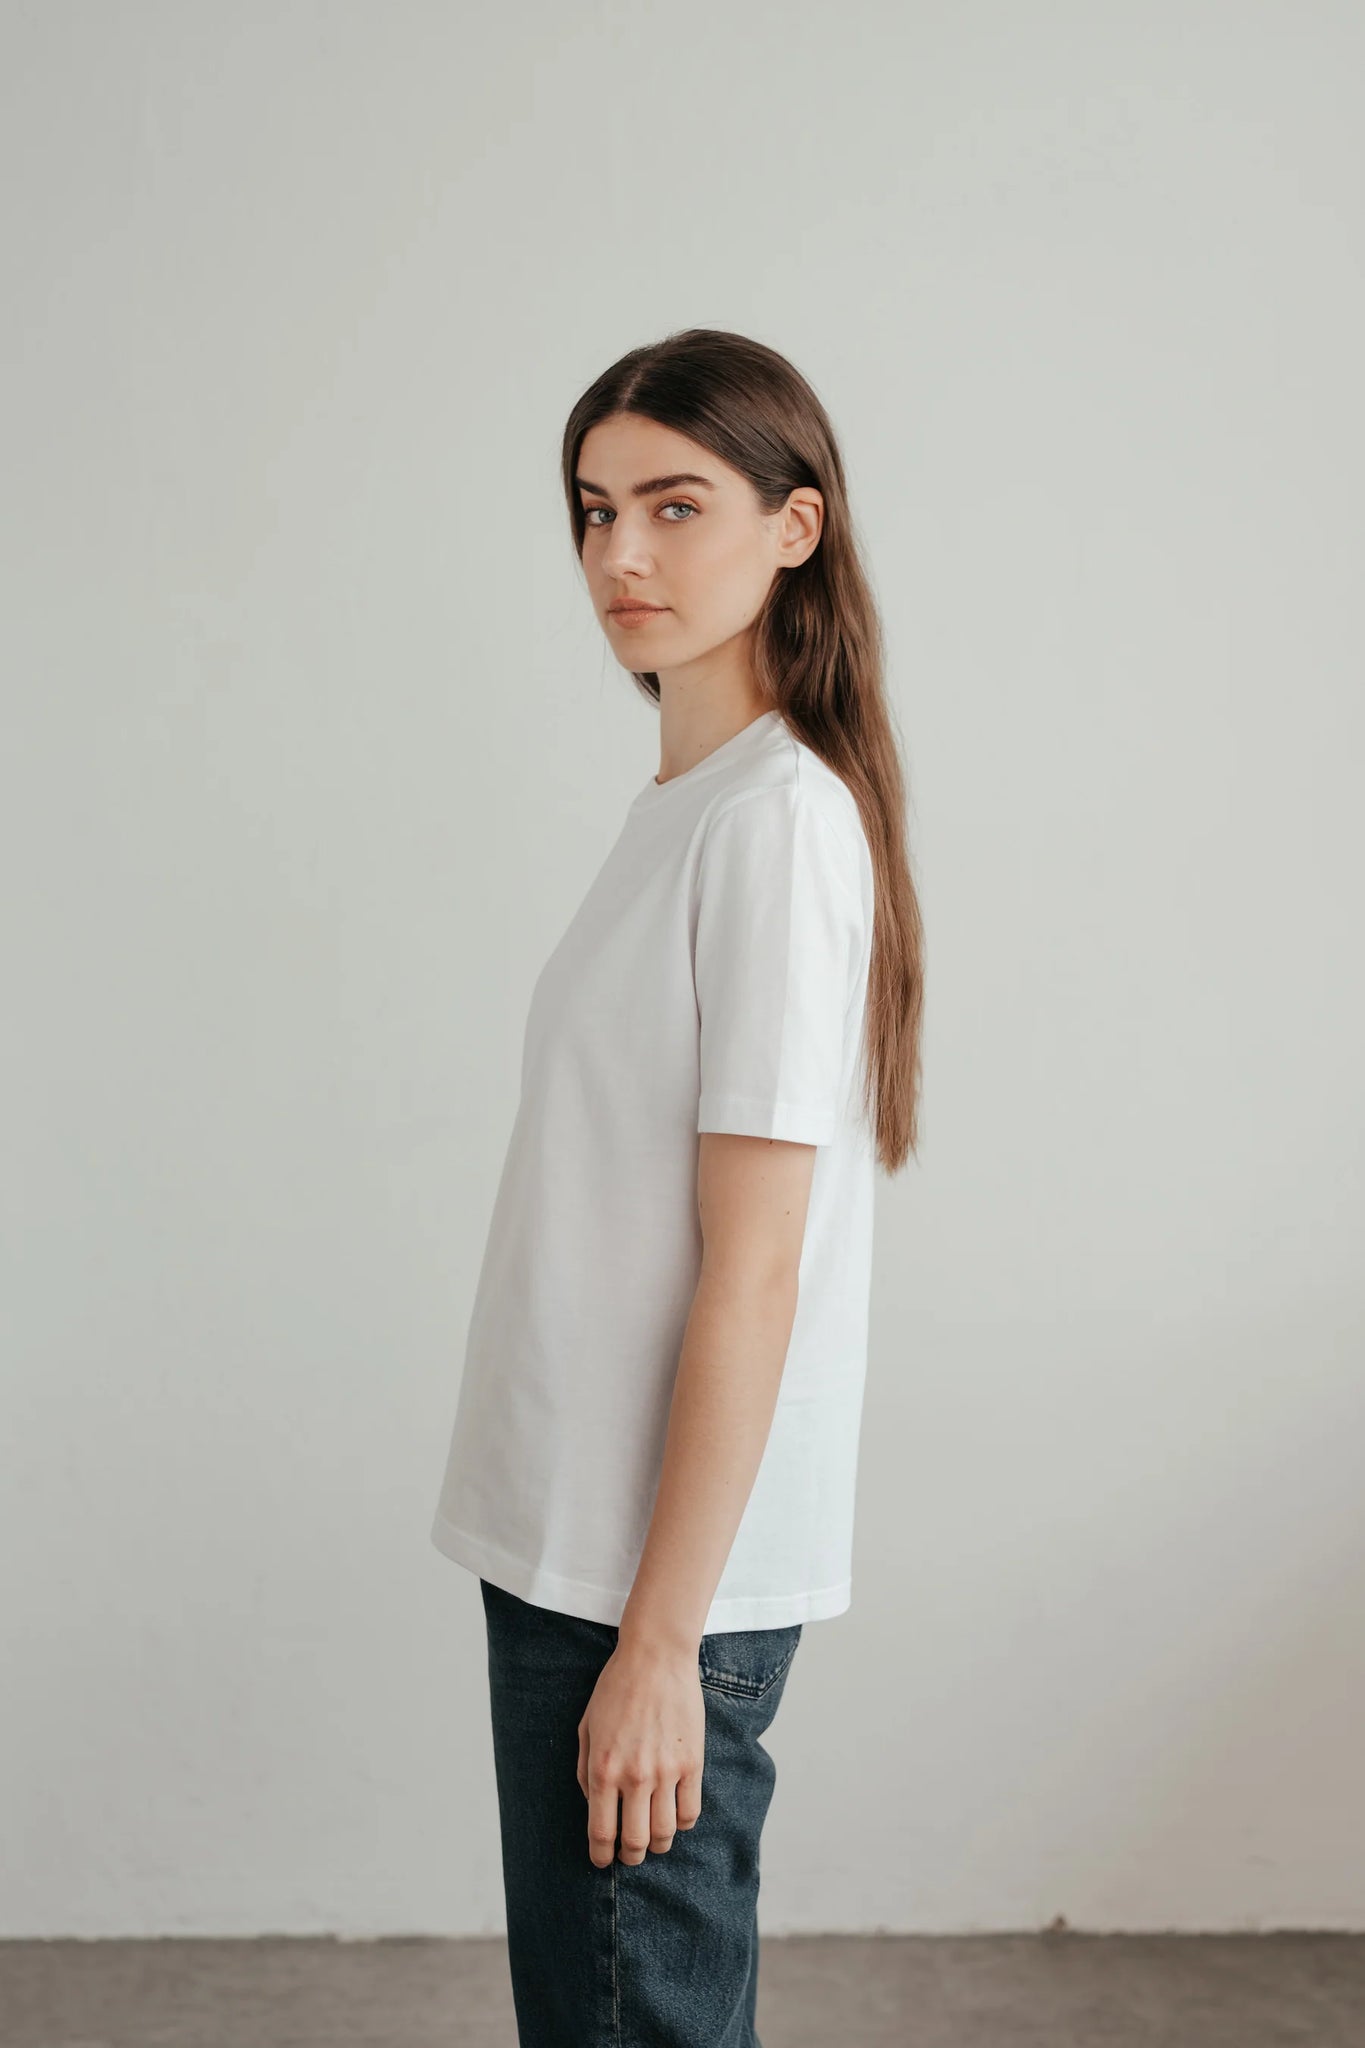 Fitted t-shirt in white by sonho stories